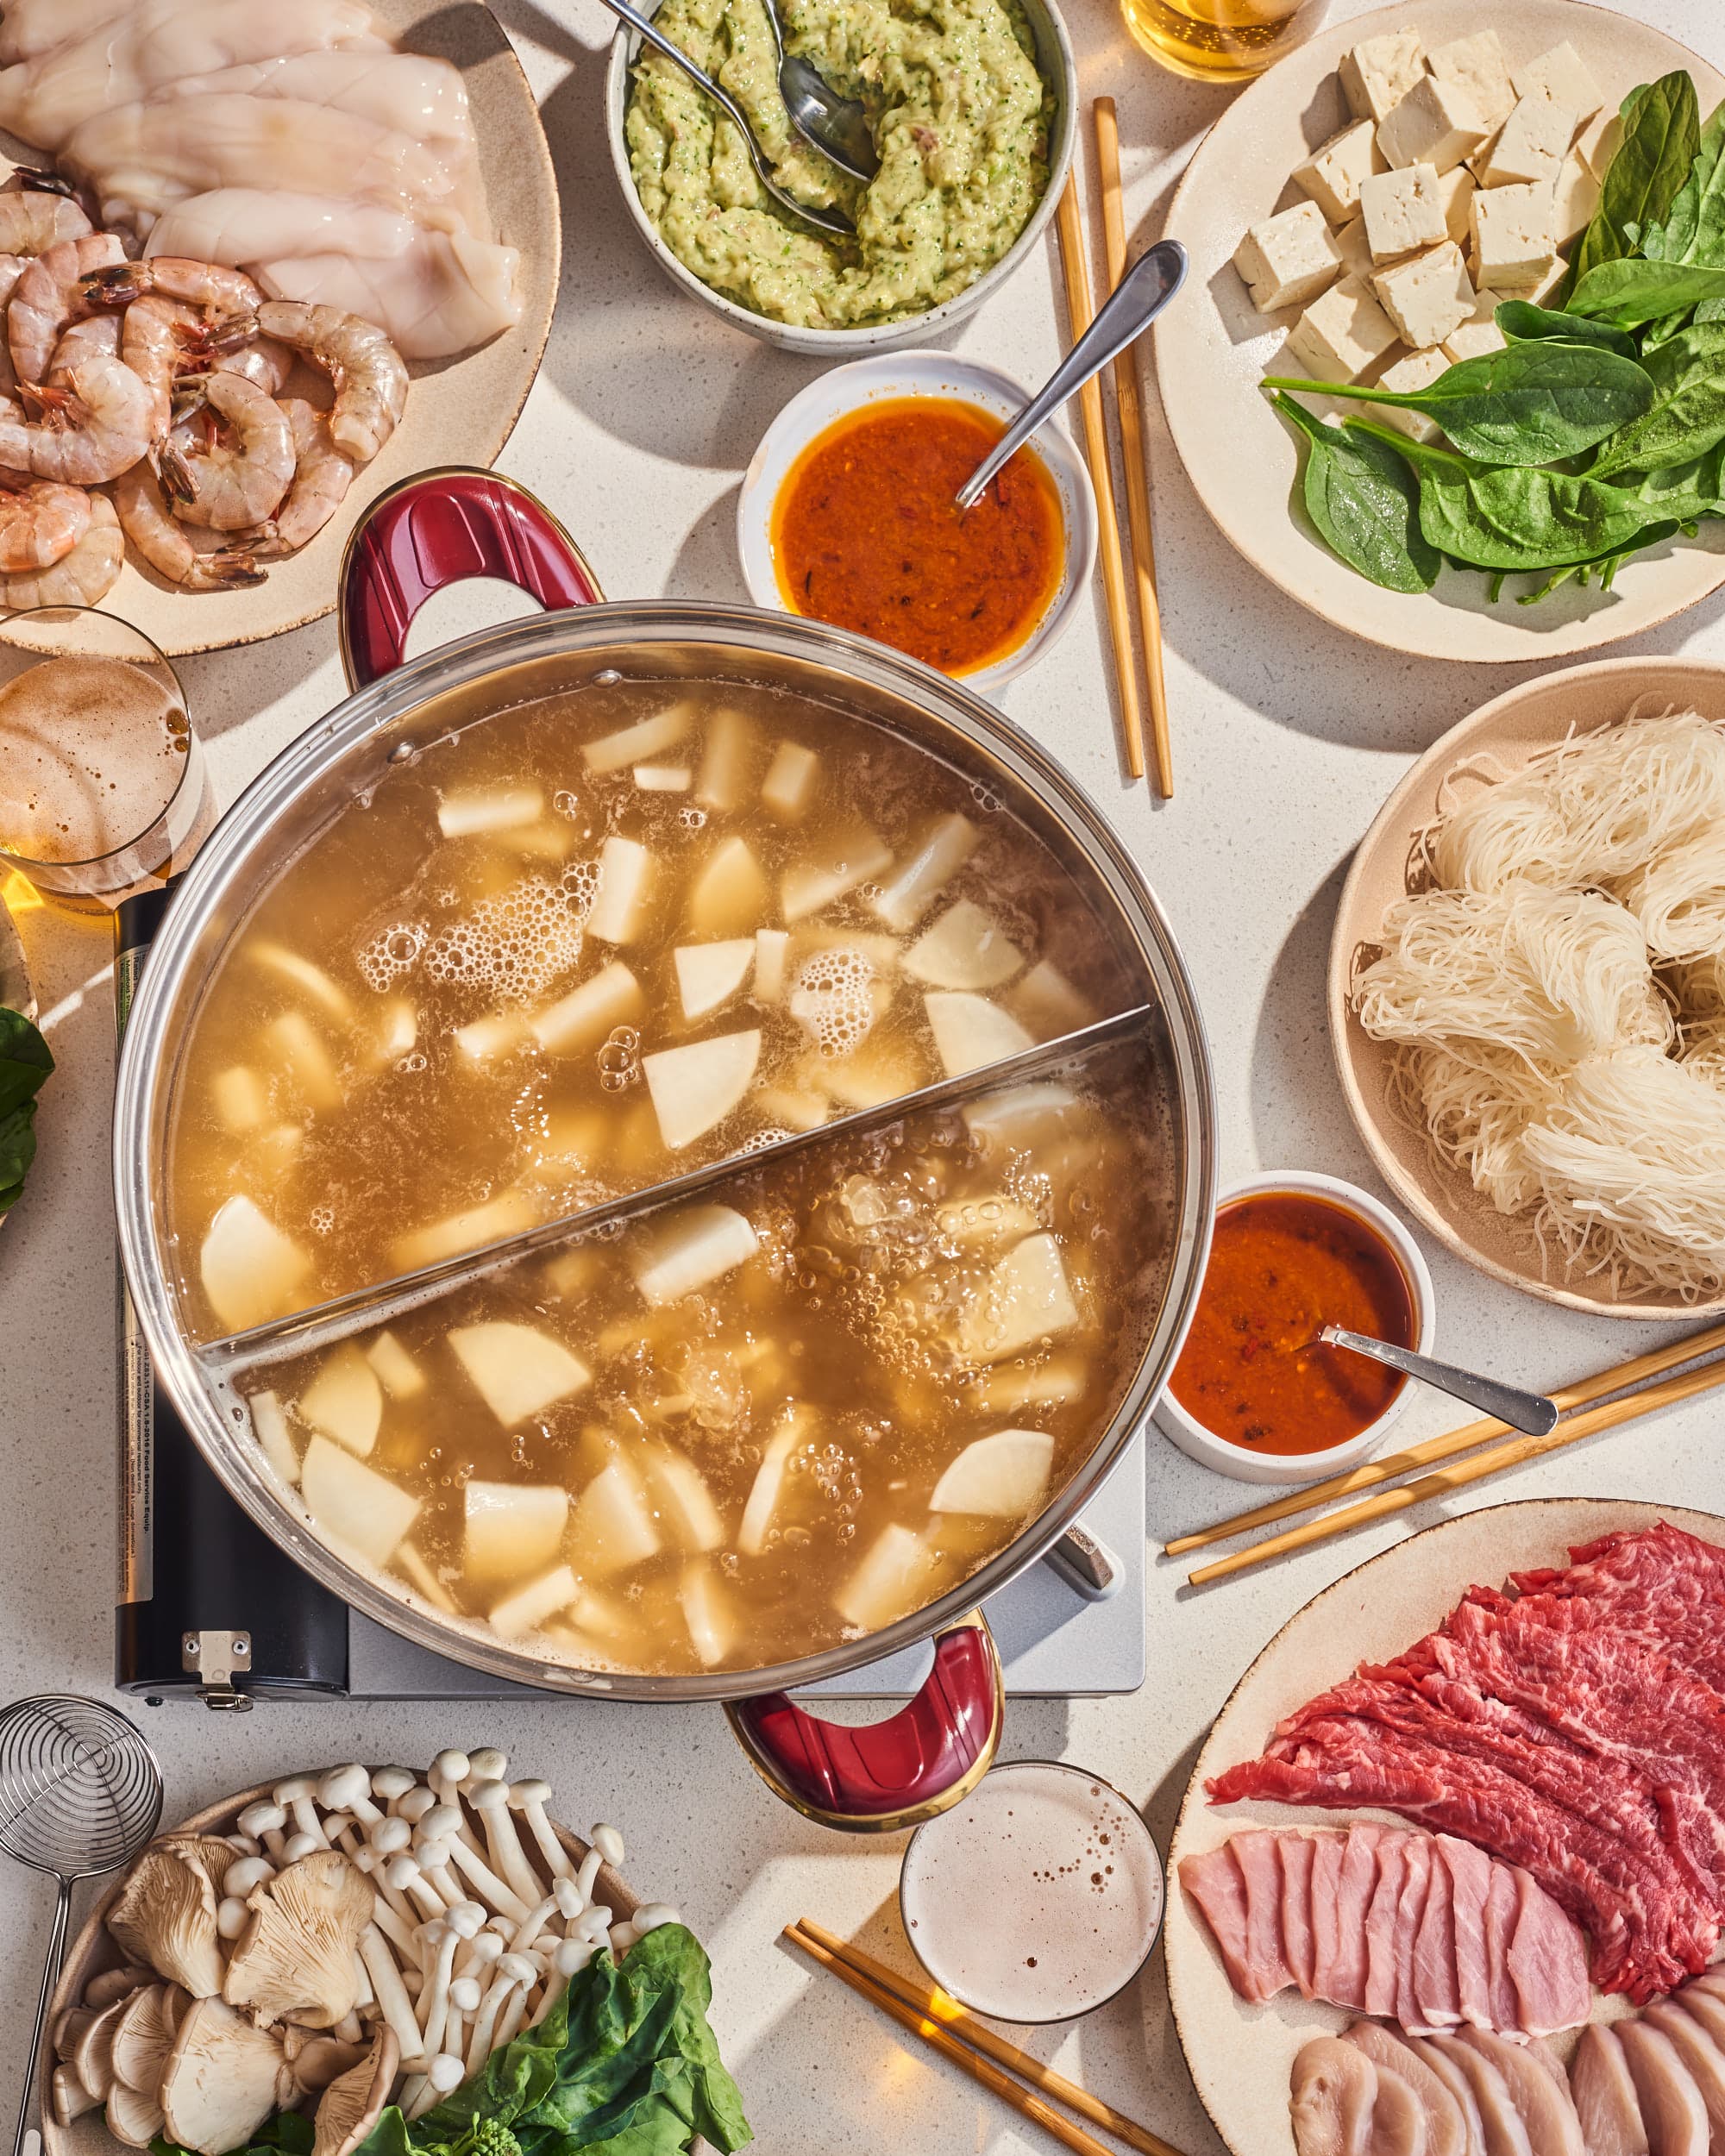 How to Enjoy Chinese Hot Pot Even in a Pandemic